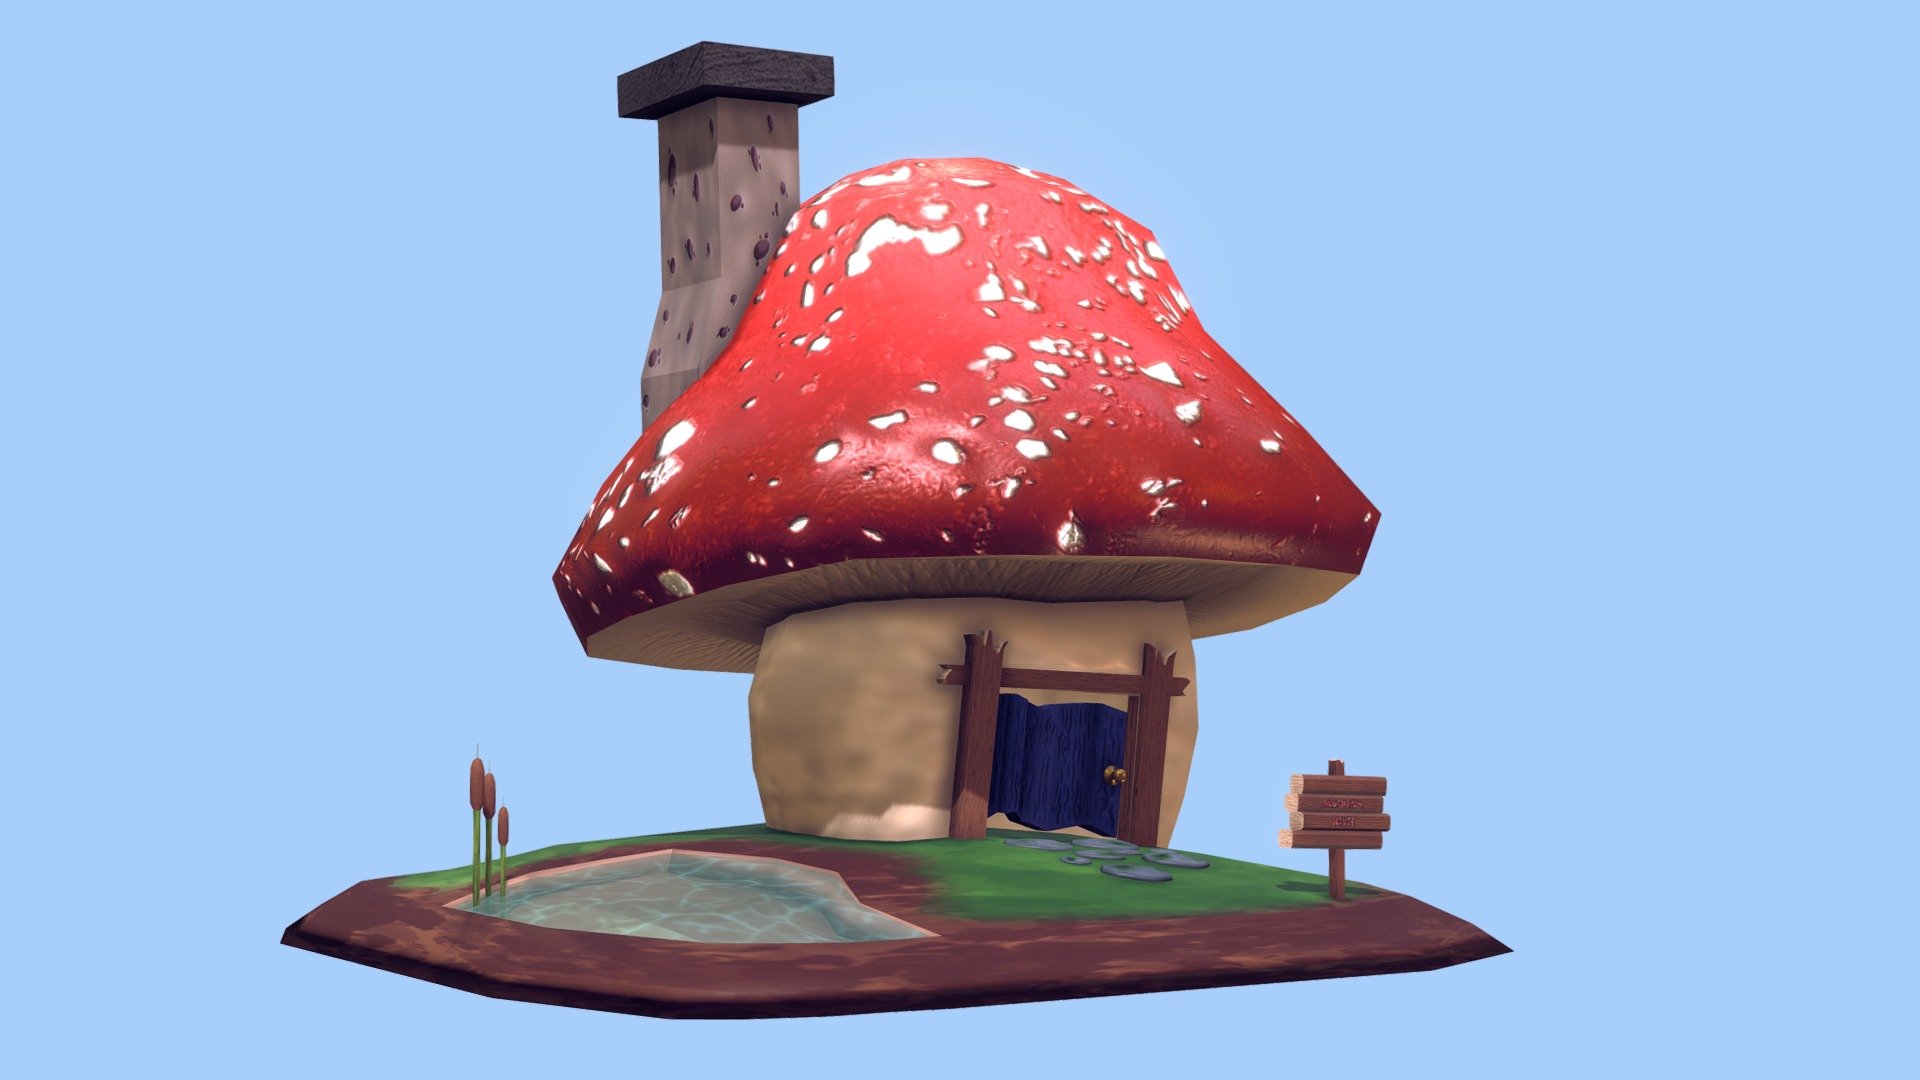 A cute little Musroom house I made to practice texturing ^^ - Mushroom House - 3D model by lindsay_jurcina 3d model